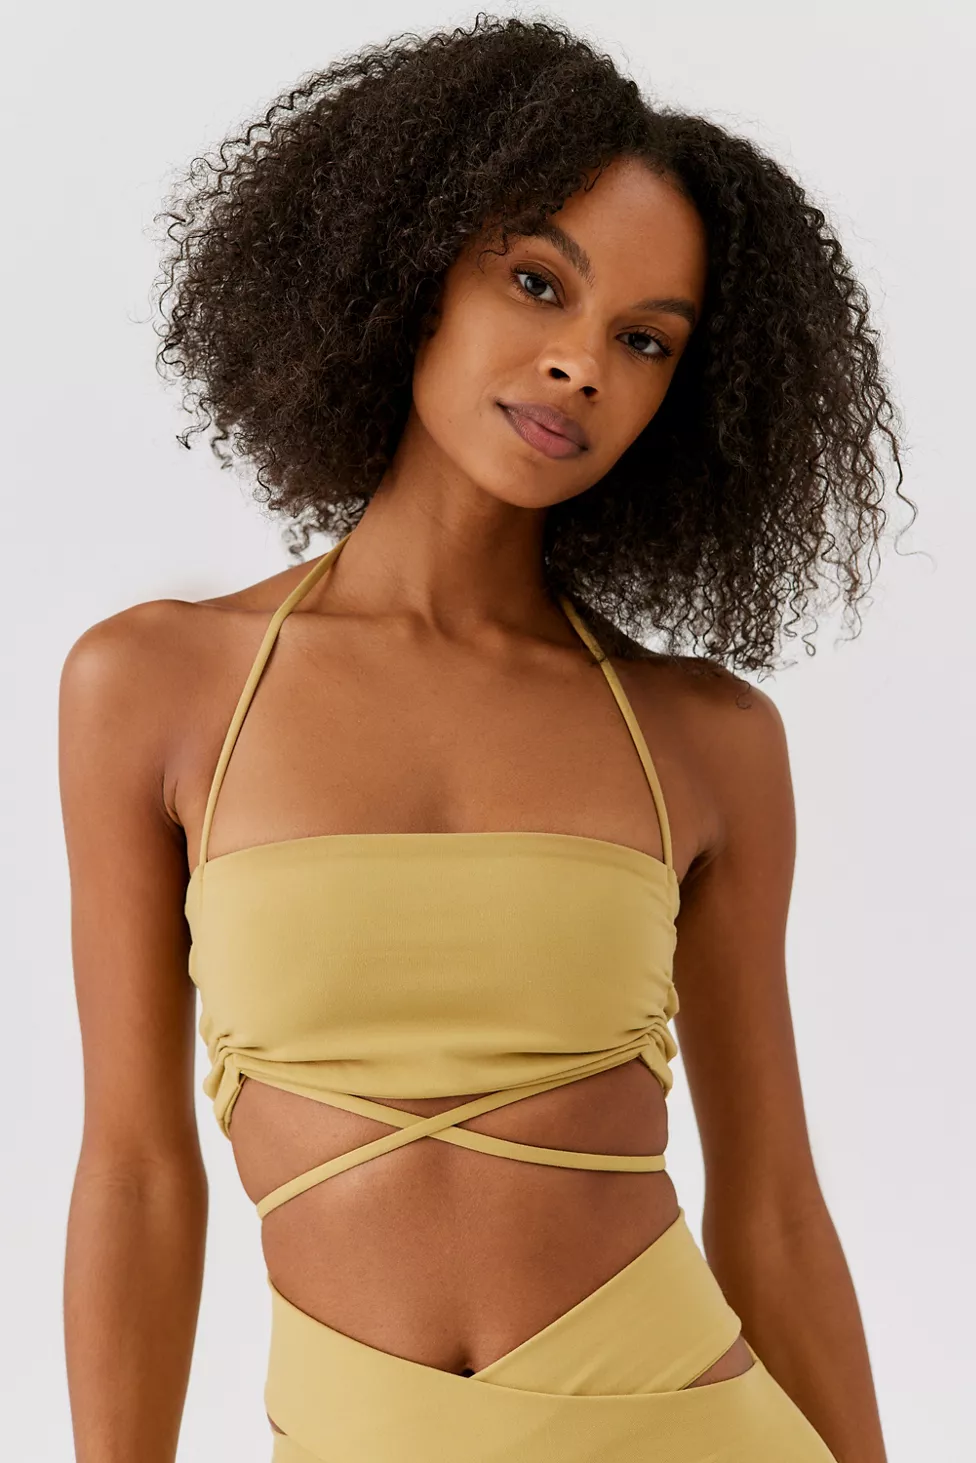 Mustard yellow strappy top